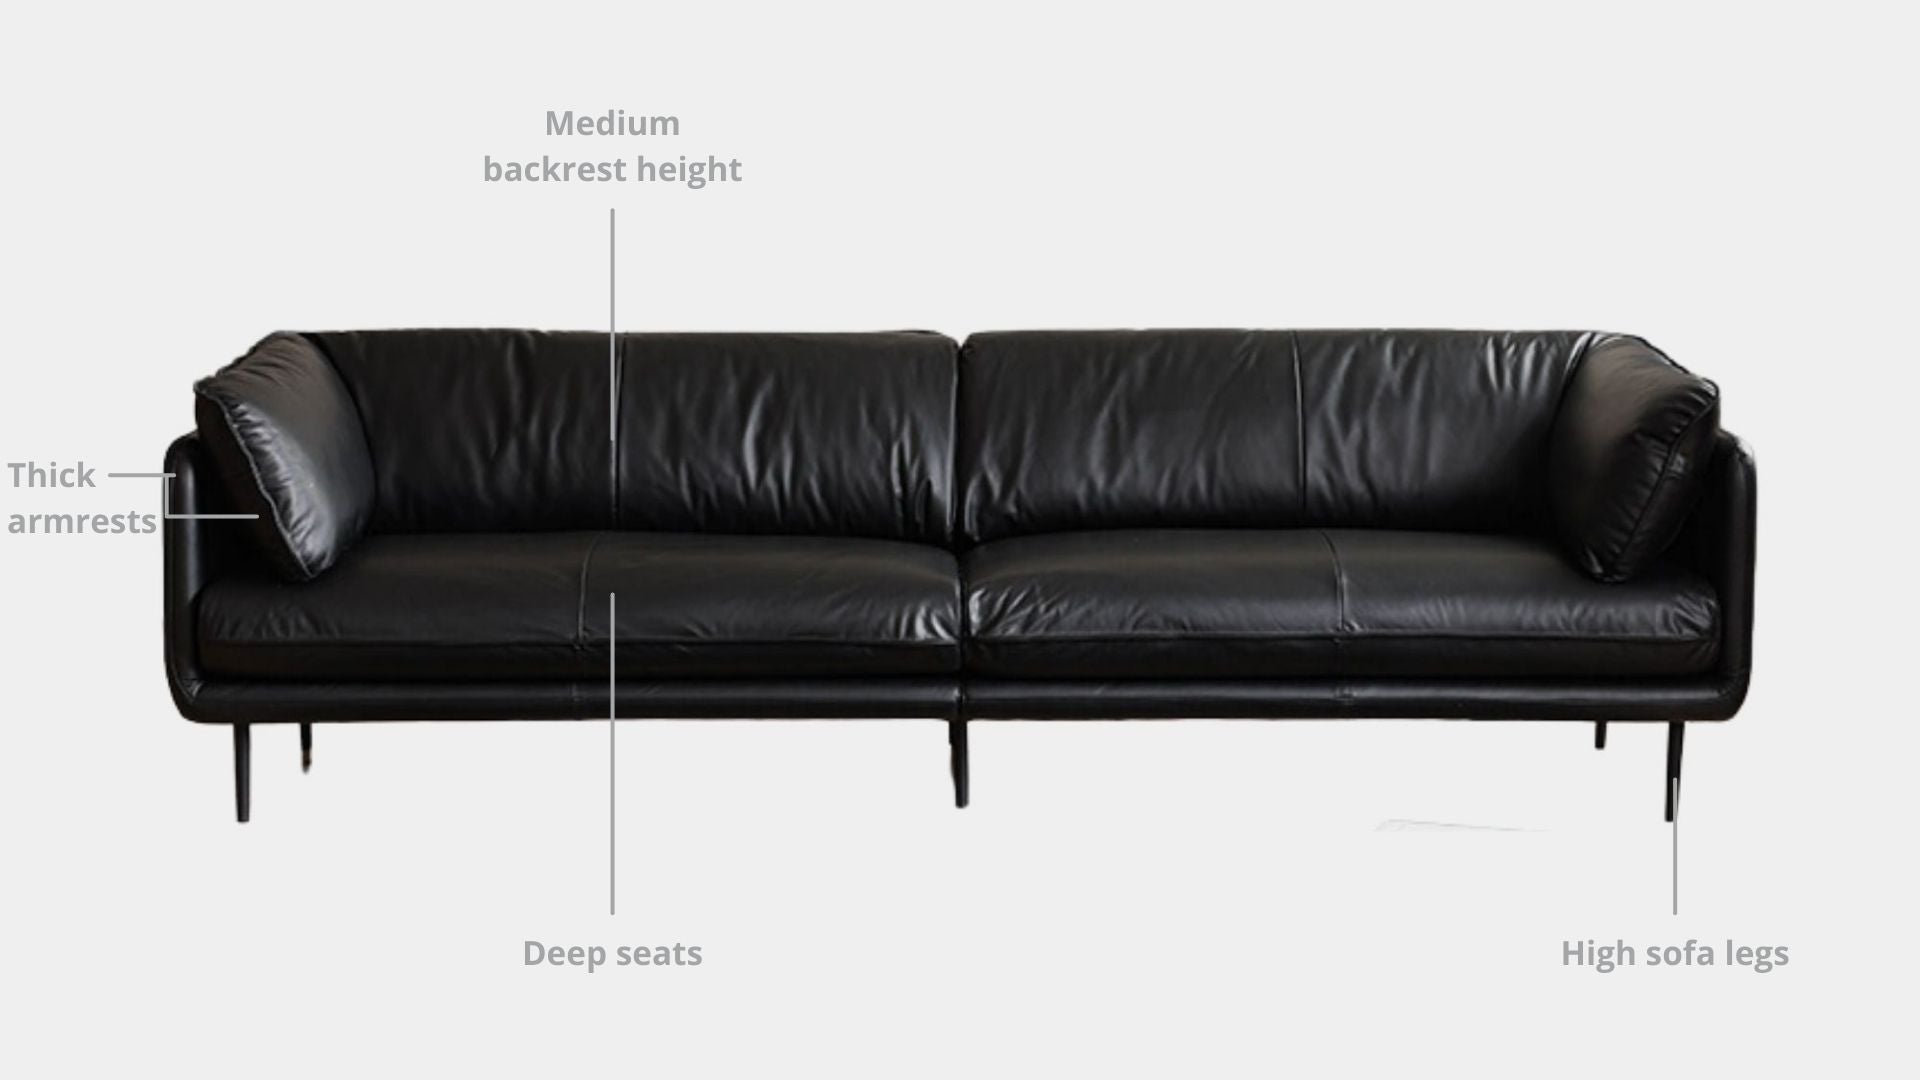 Key features such as armrest thickness, cushion height, seat depth and sofa leg height for Cuddle Half Leather Sofa